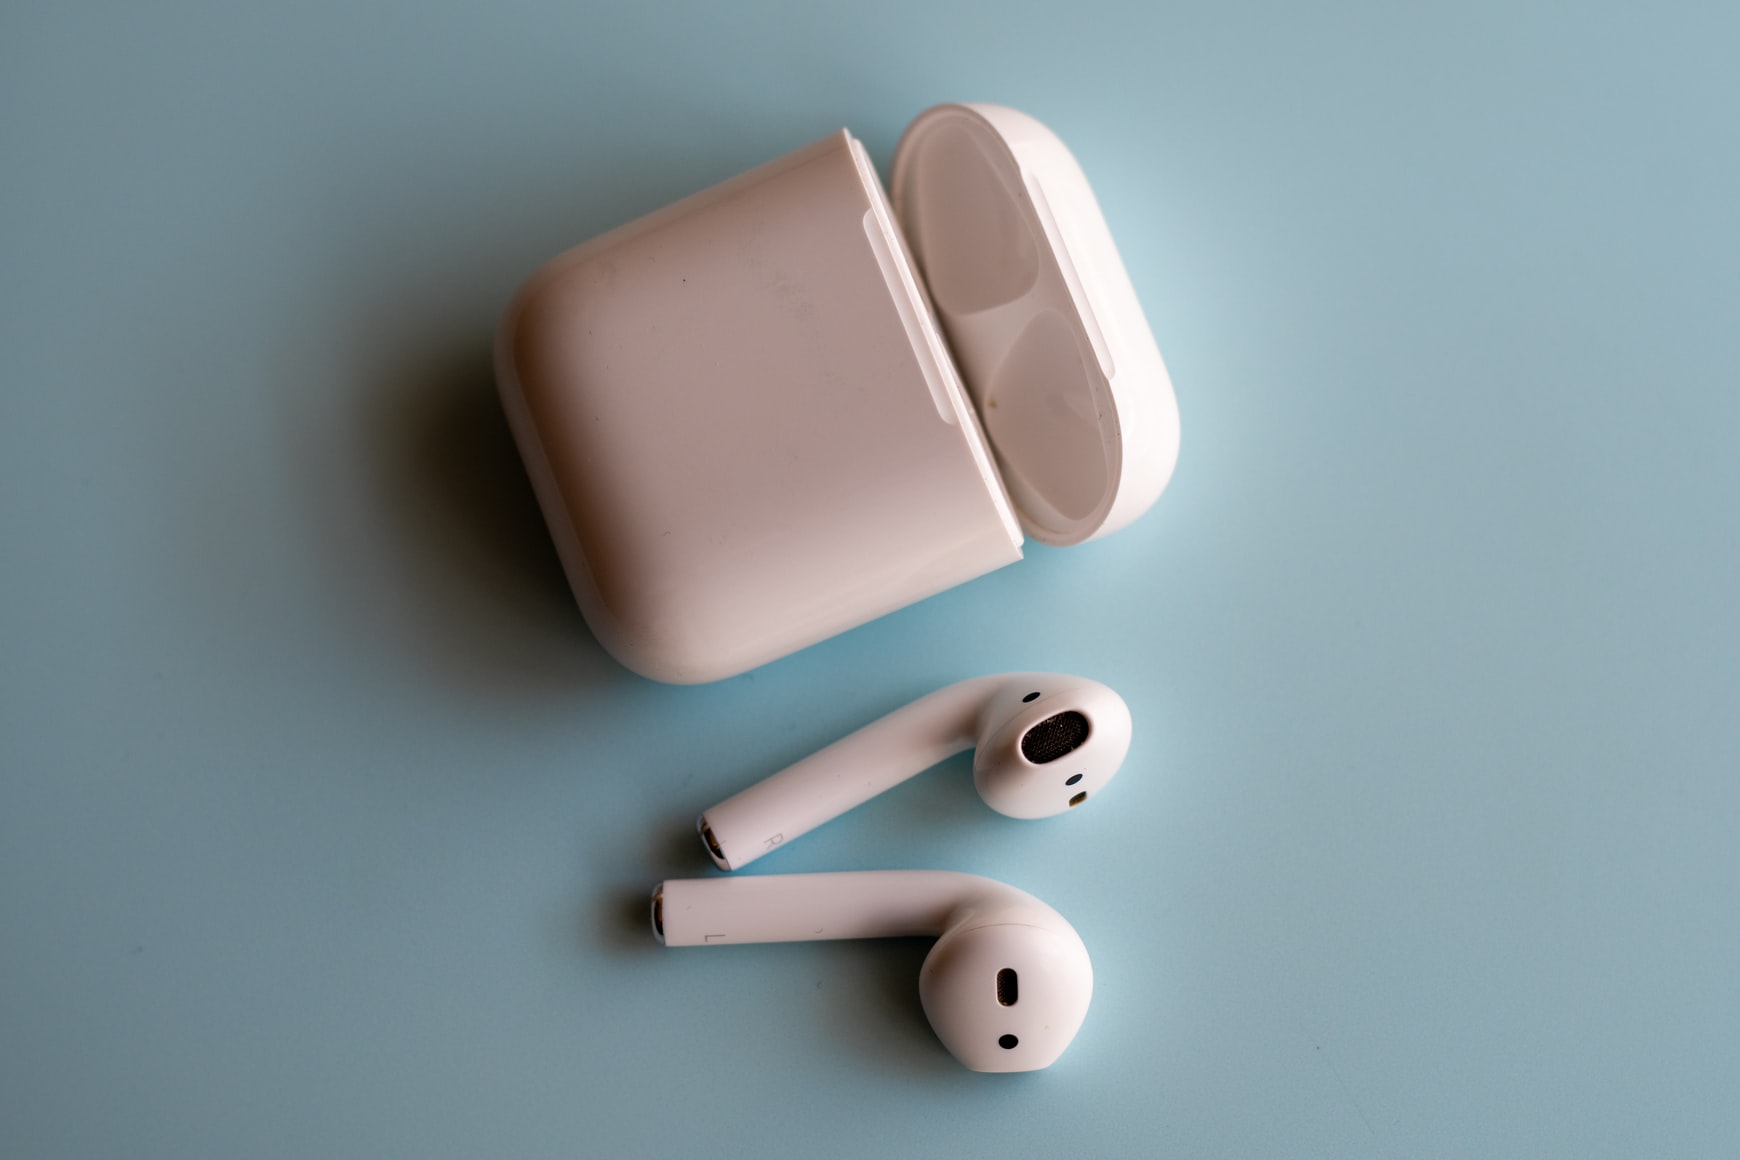 How To Charge Airpods Without A Case